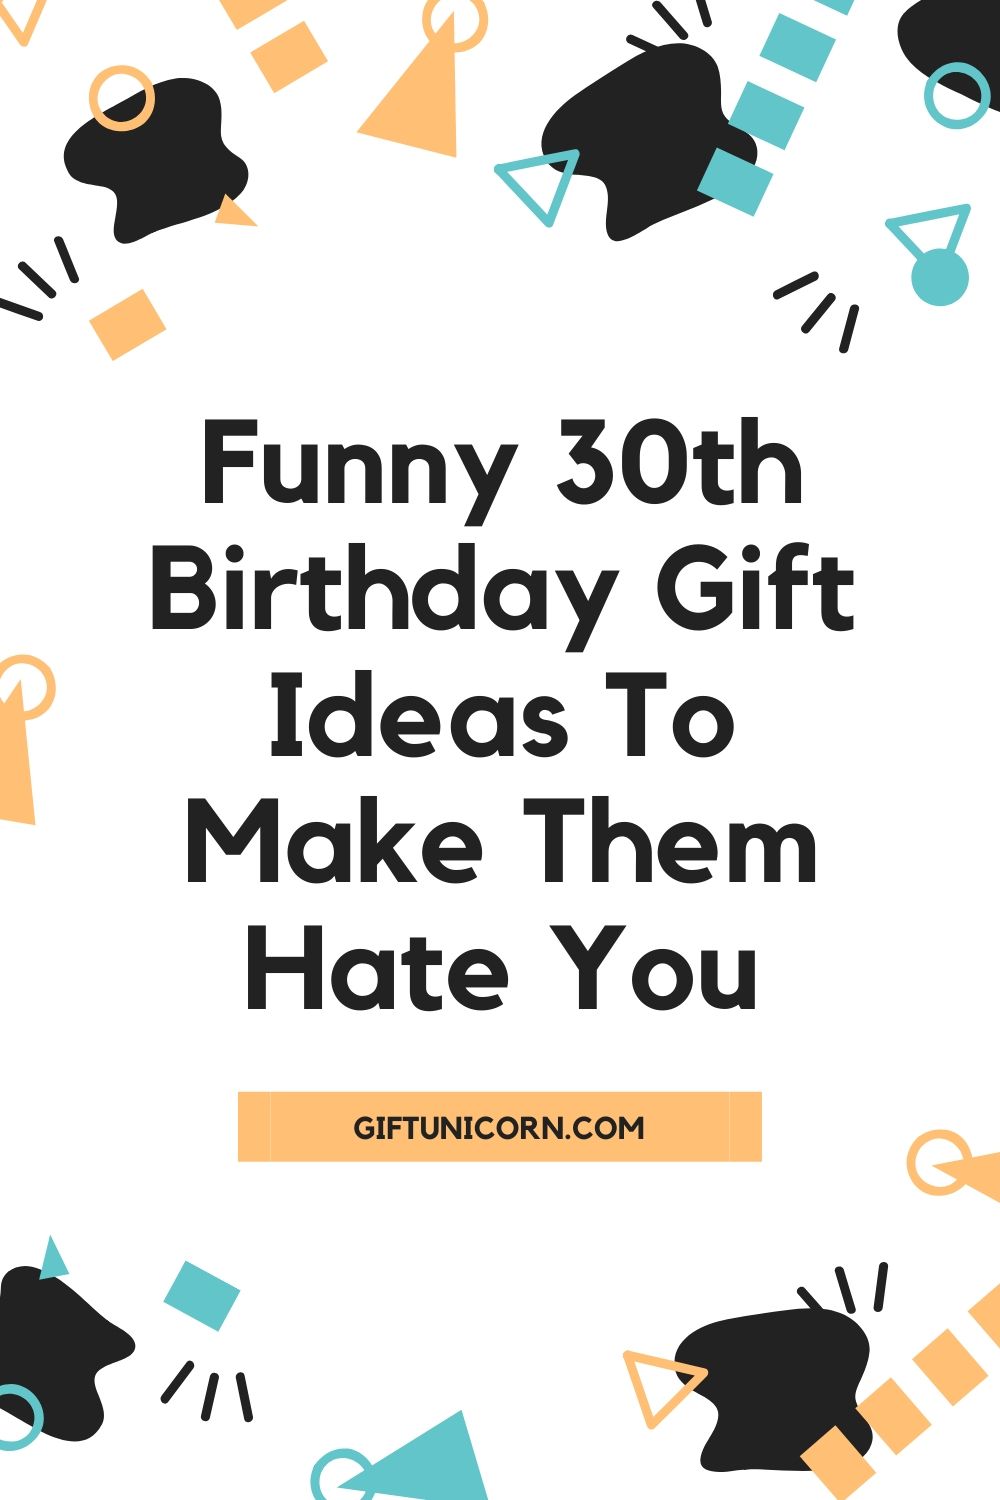 Funny 30th Birthday Gift Ideas To Make Them Hate You - pinterest pin image